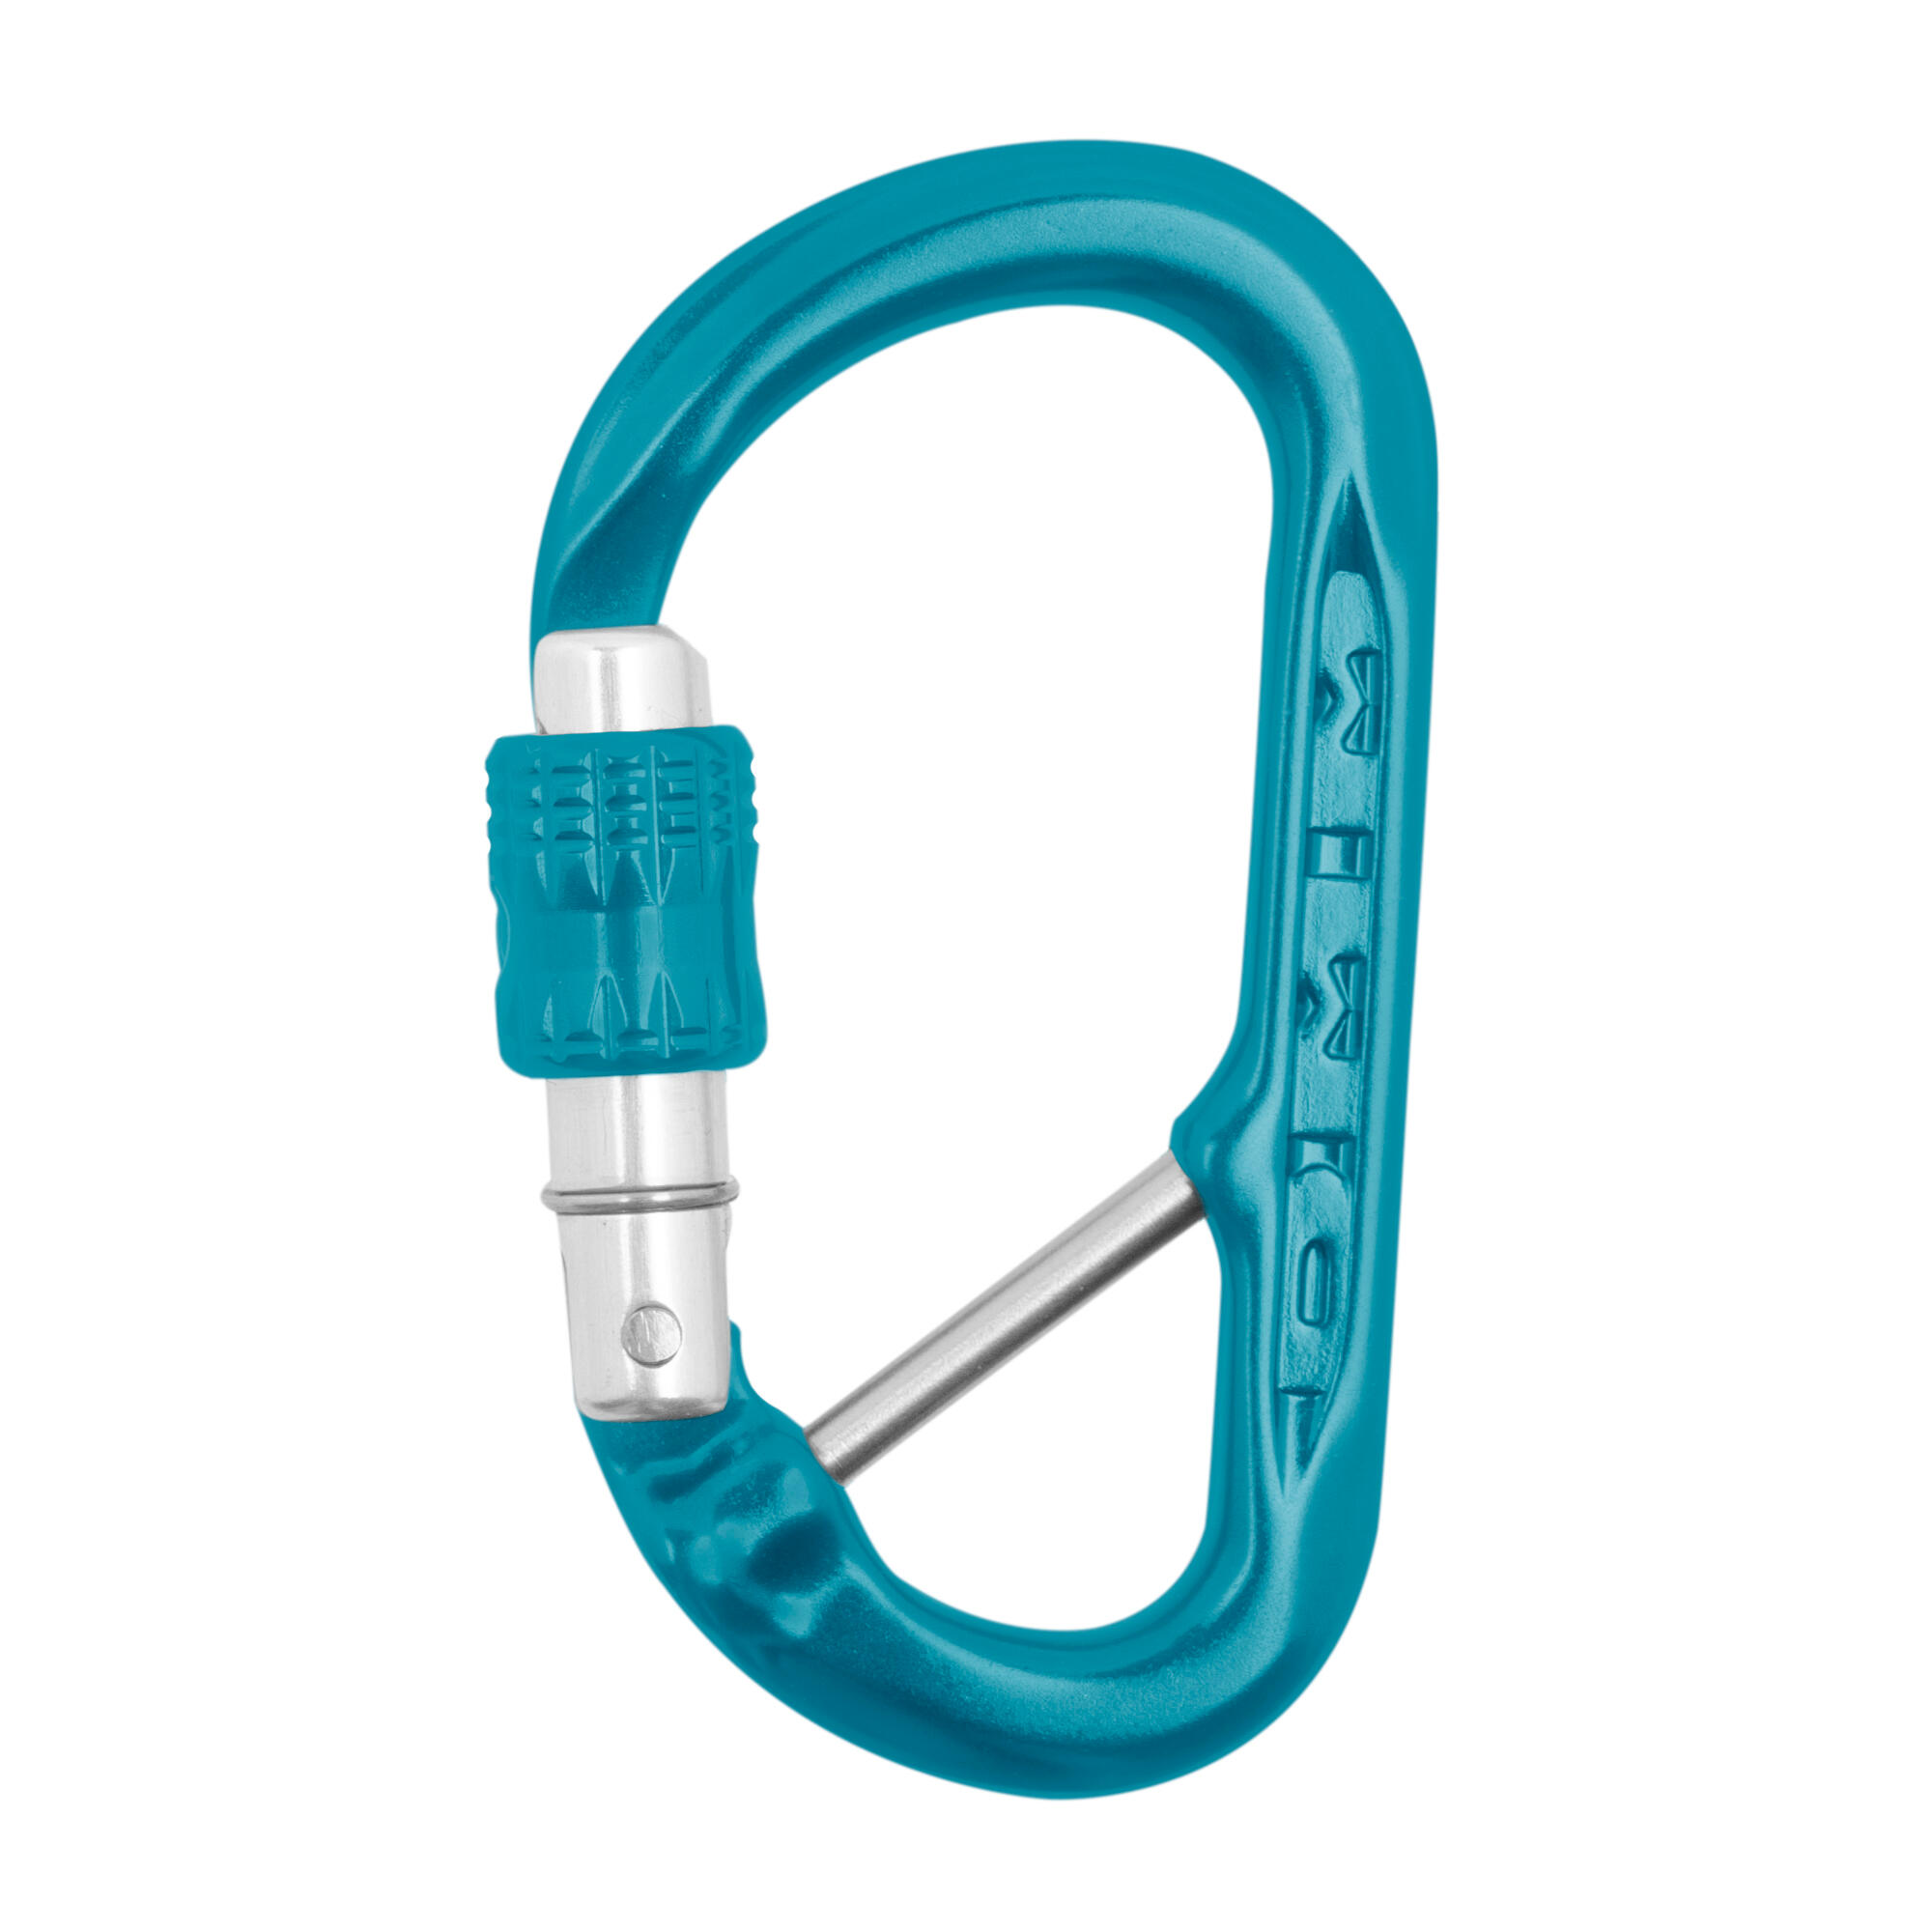 DMM XSRE Lock Captive Bar Accessory Carabiner - Turquoise